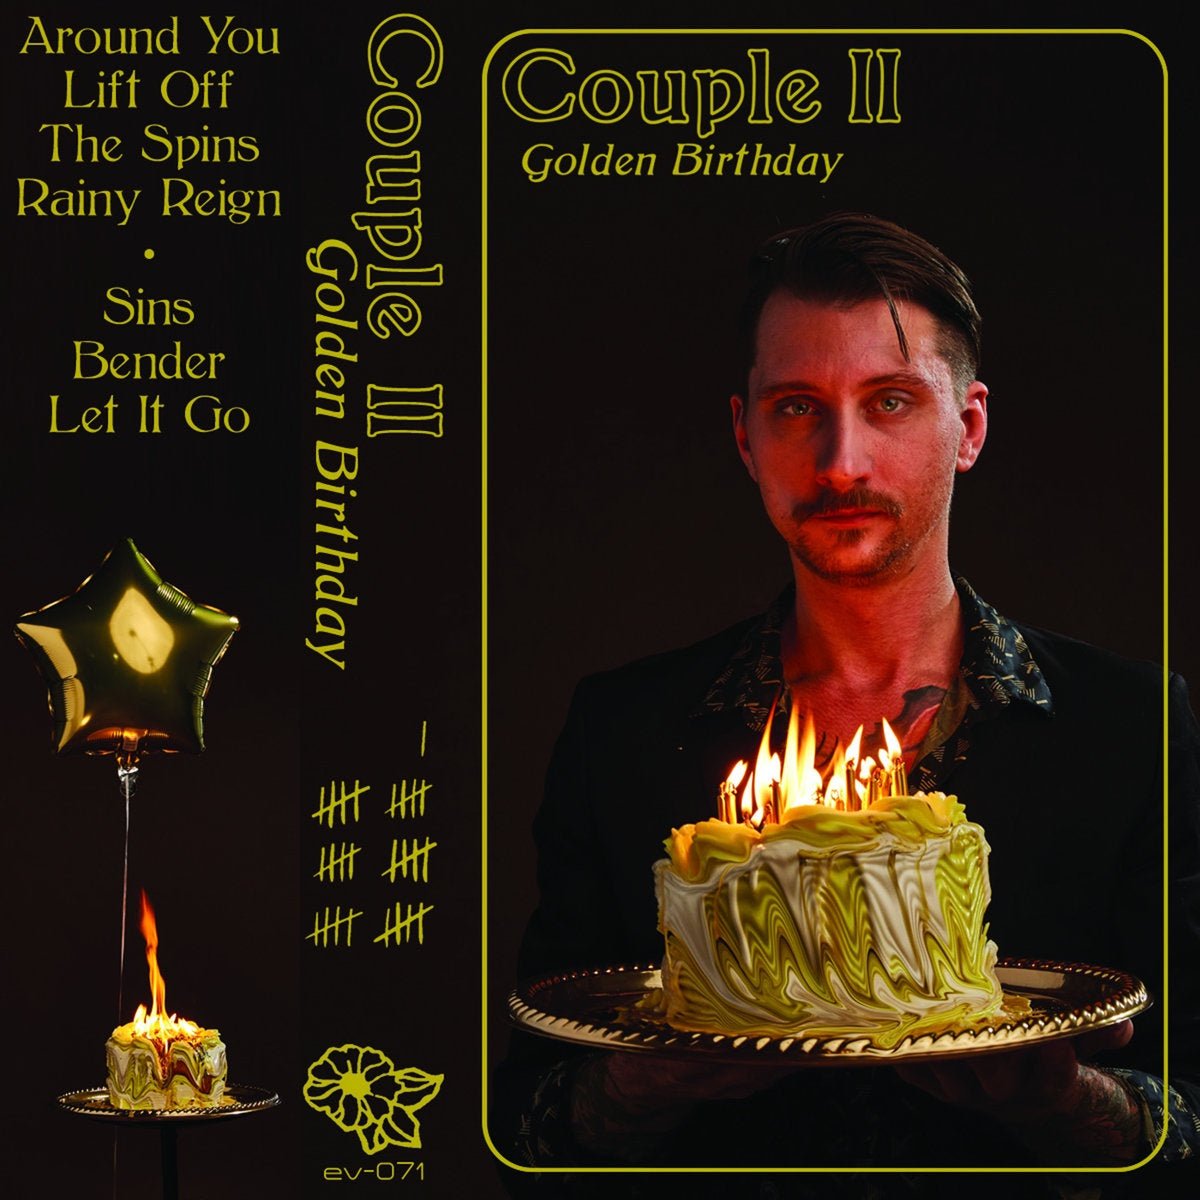 Couple II - Golden Birthday - New Cassette 2019 Eye Vybe Limited Edition Brown Tape - Electronic / Synthpop / Local